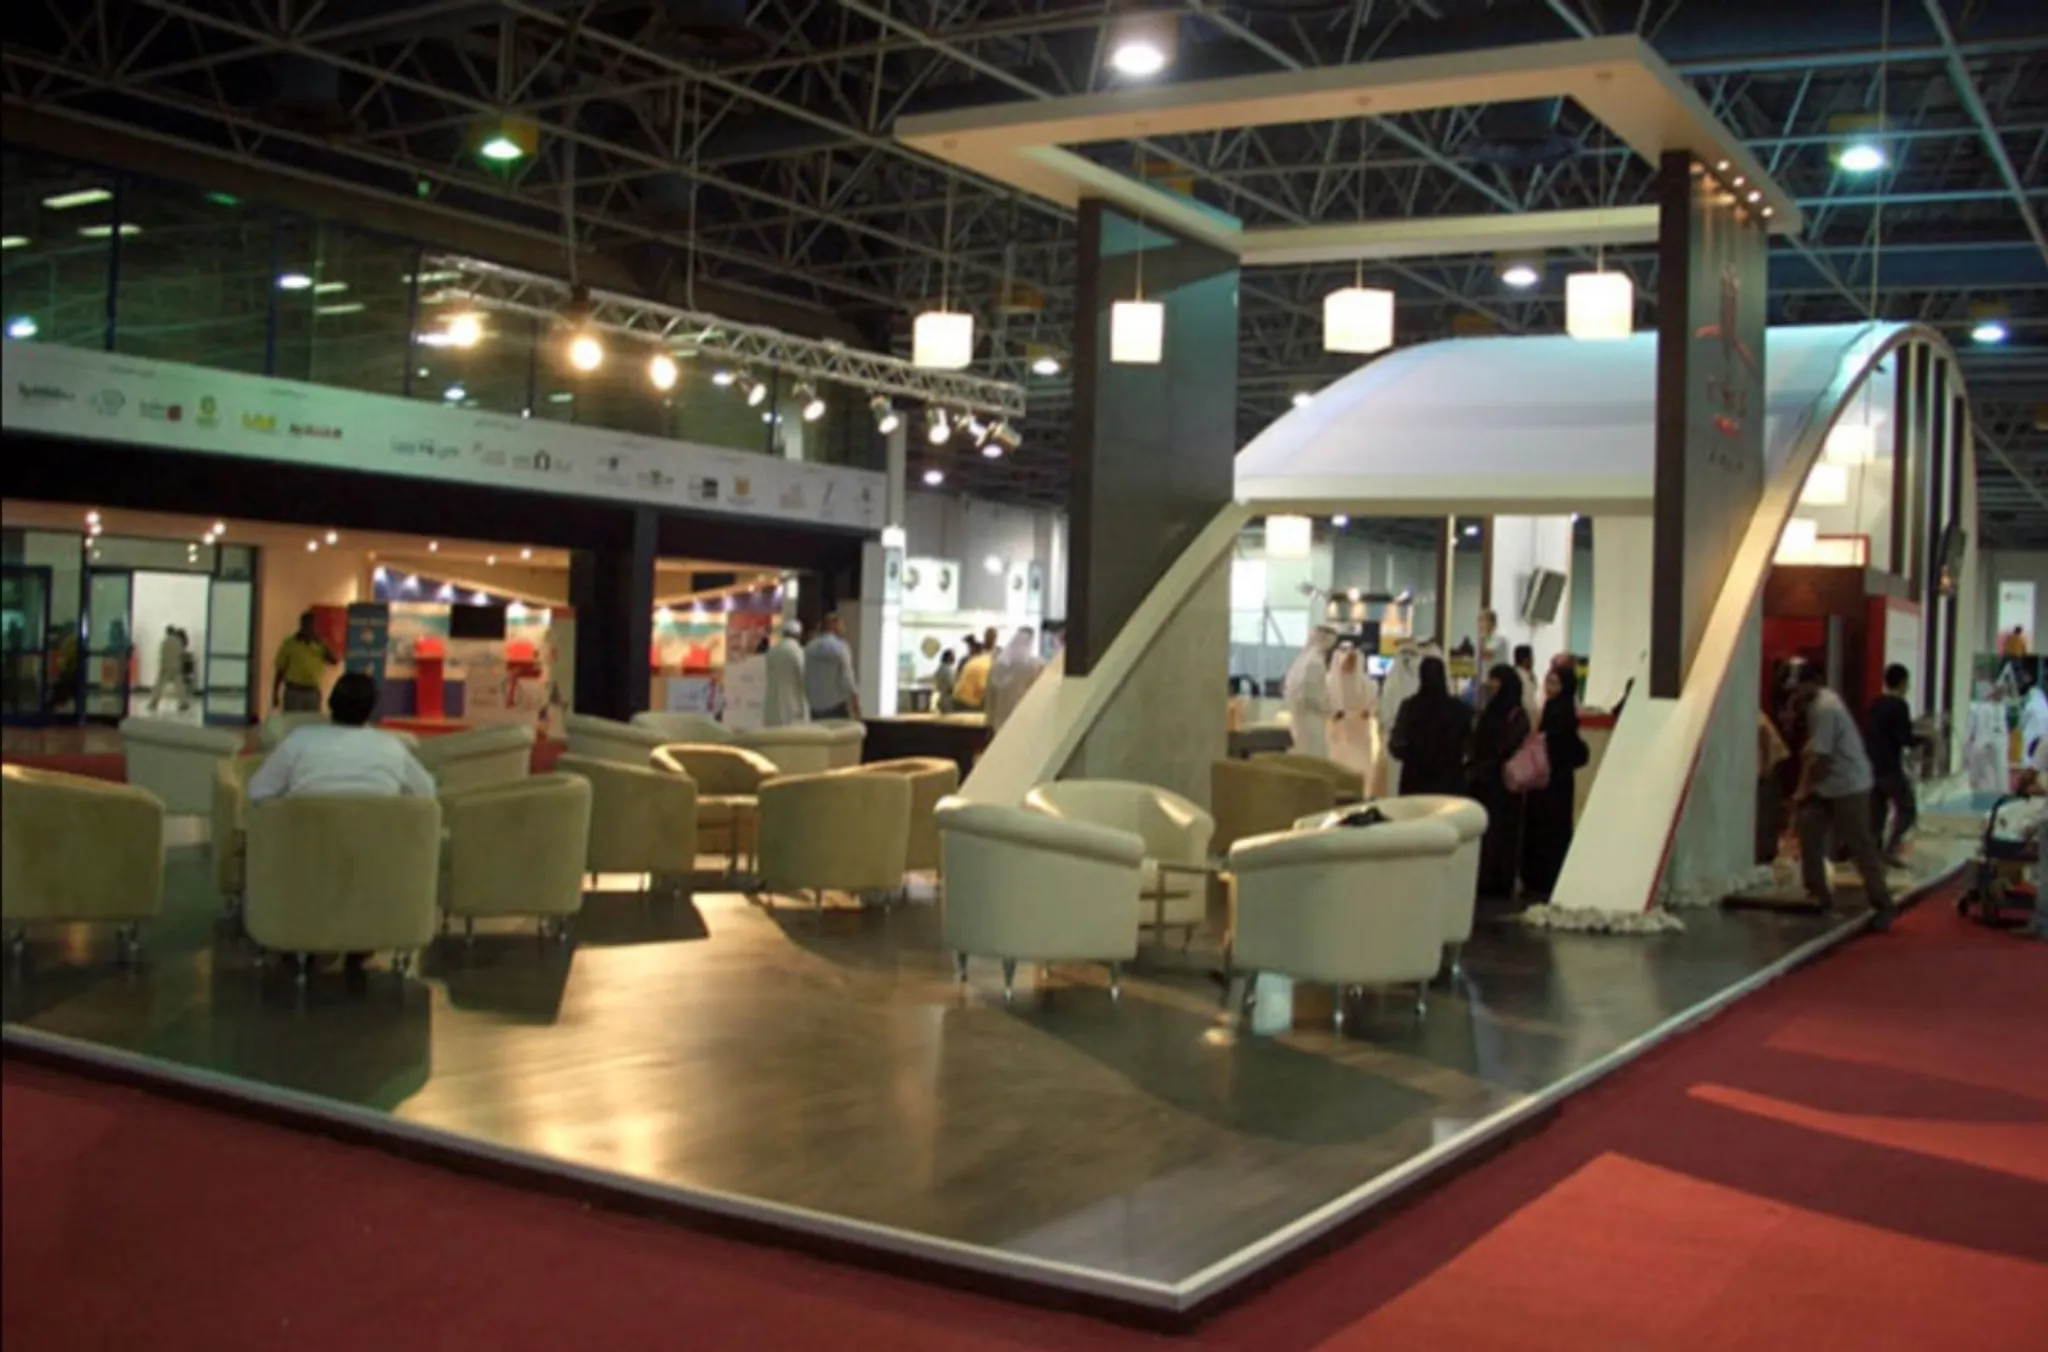 InstoreMaster Exhibition Stand example